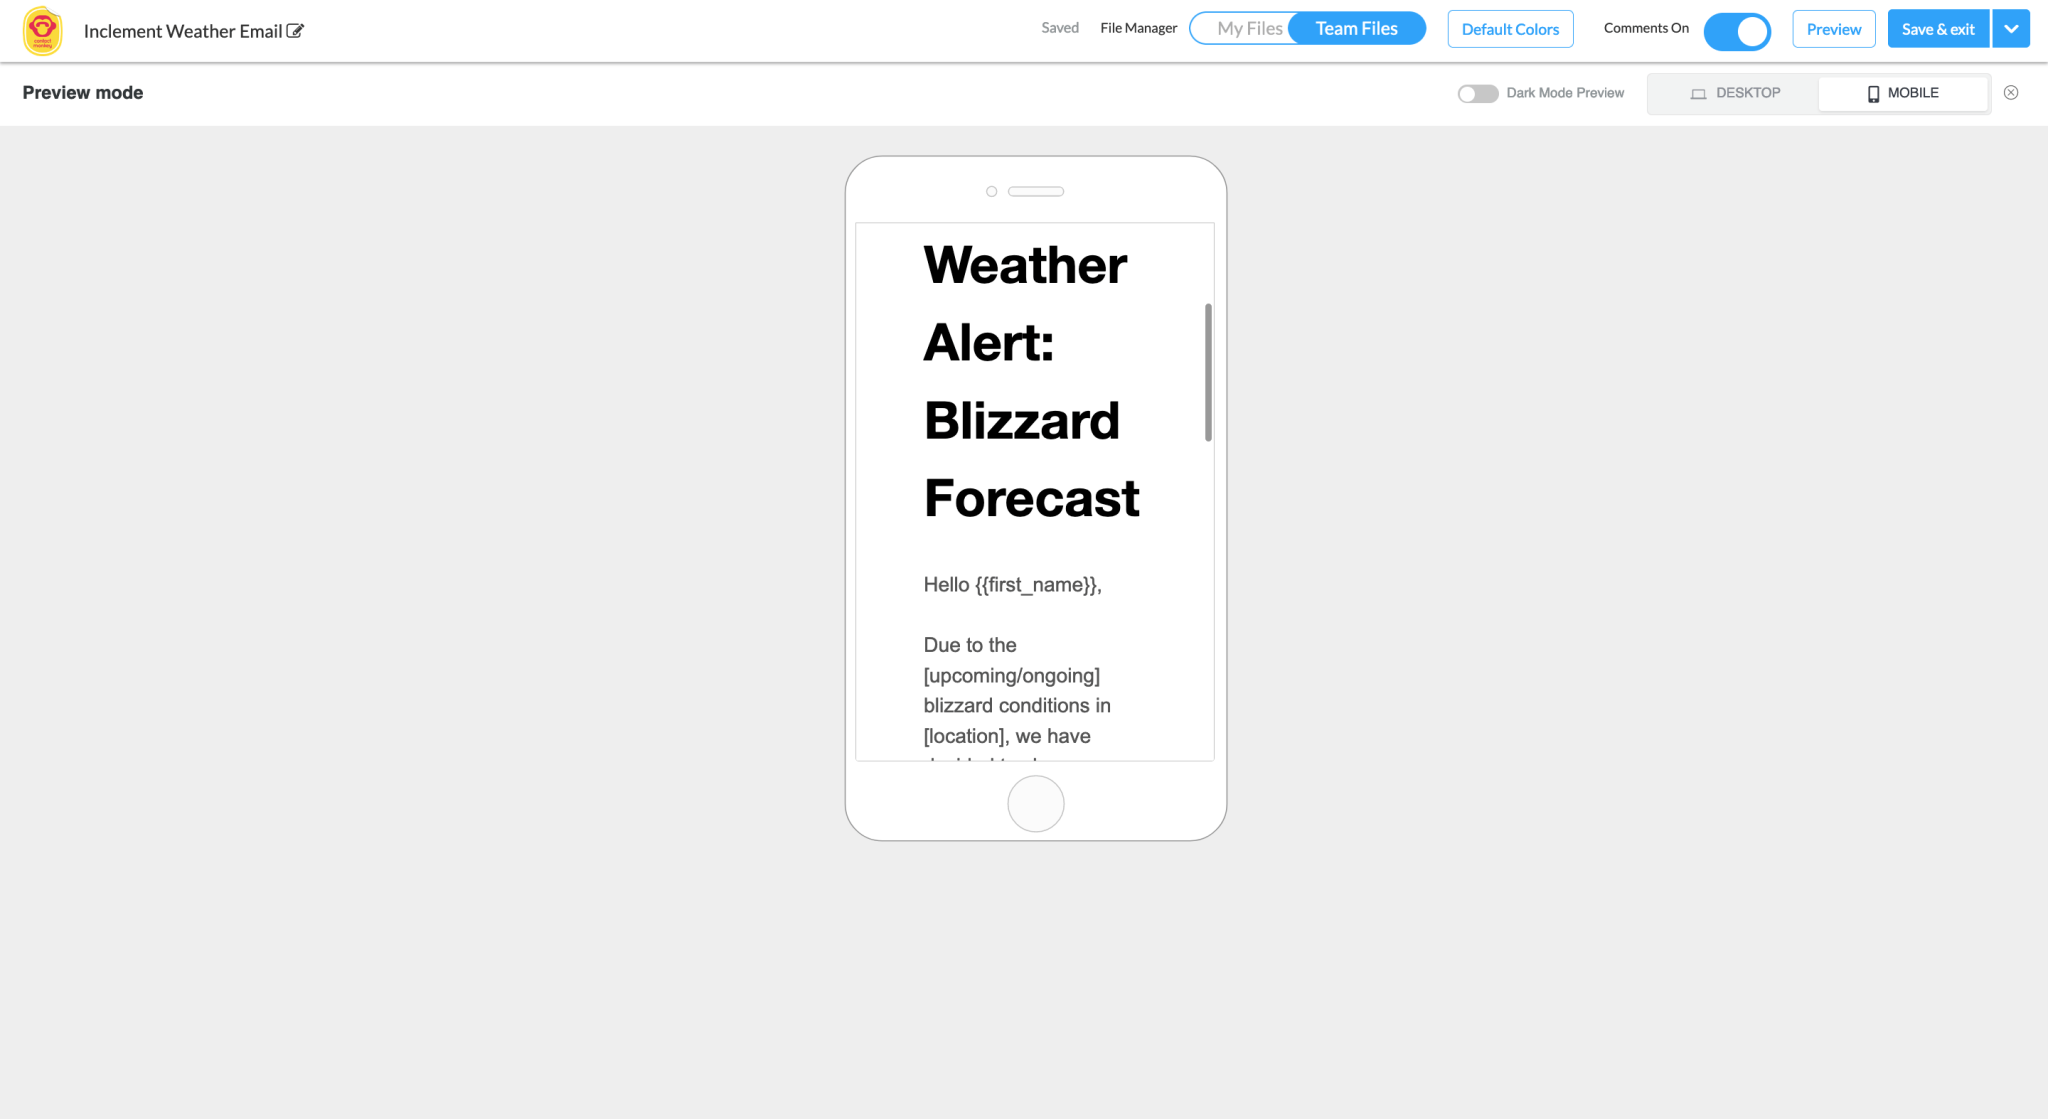 Screenshot of inclement weather email template being previewed for mobile devices within ContactMonkey.